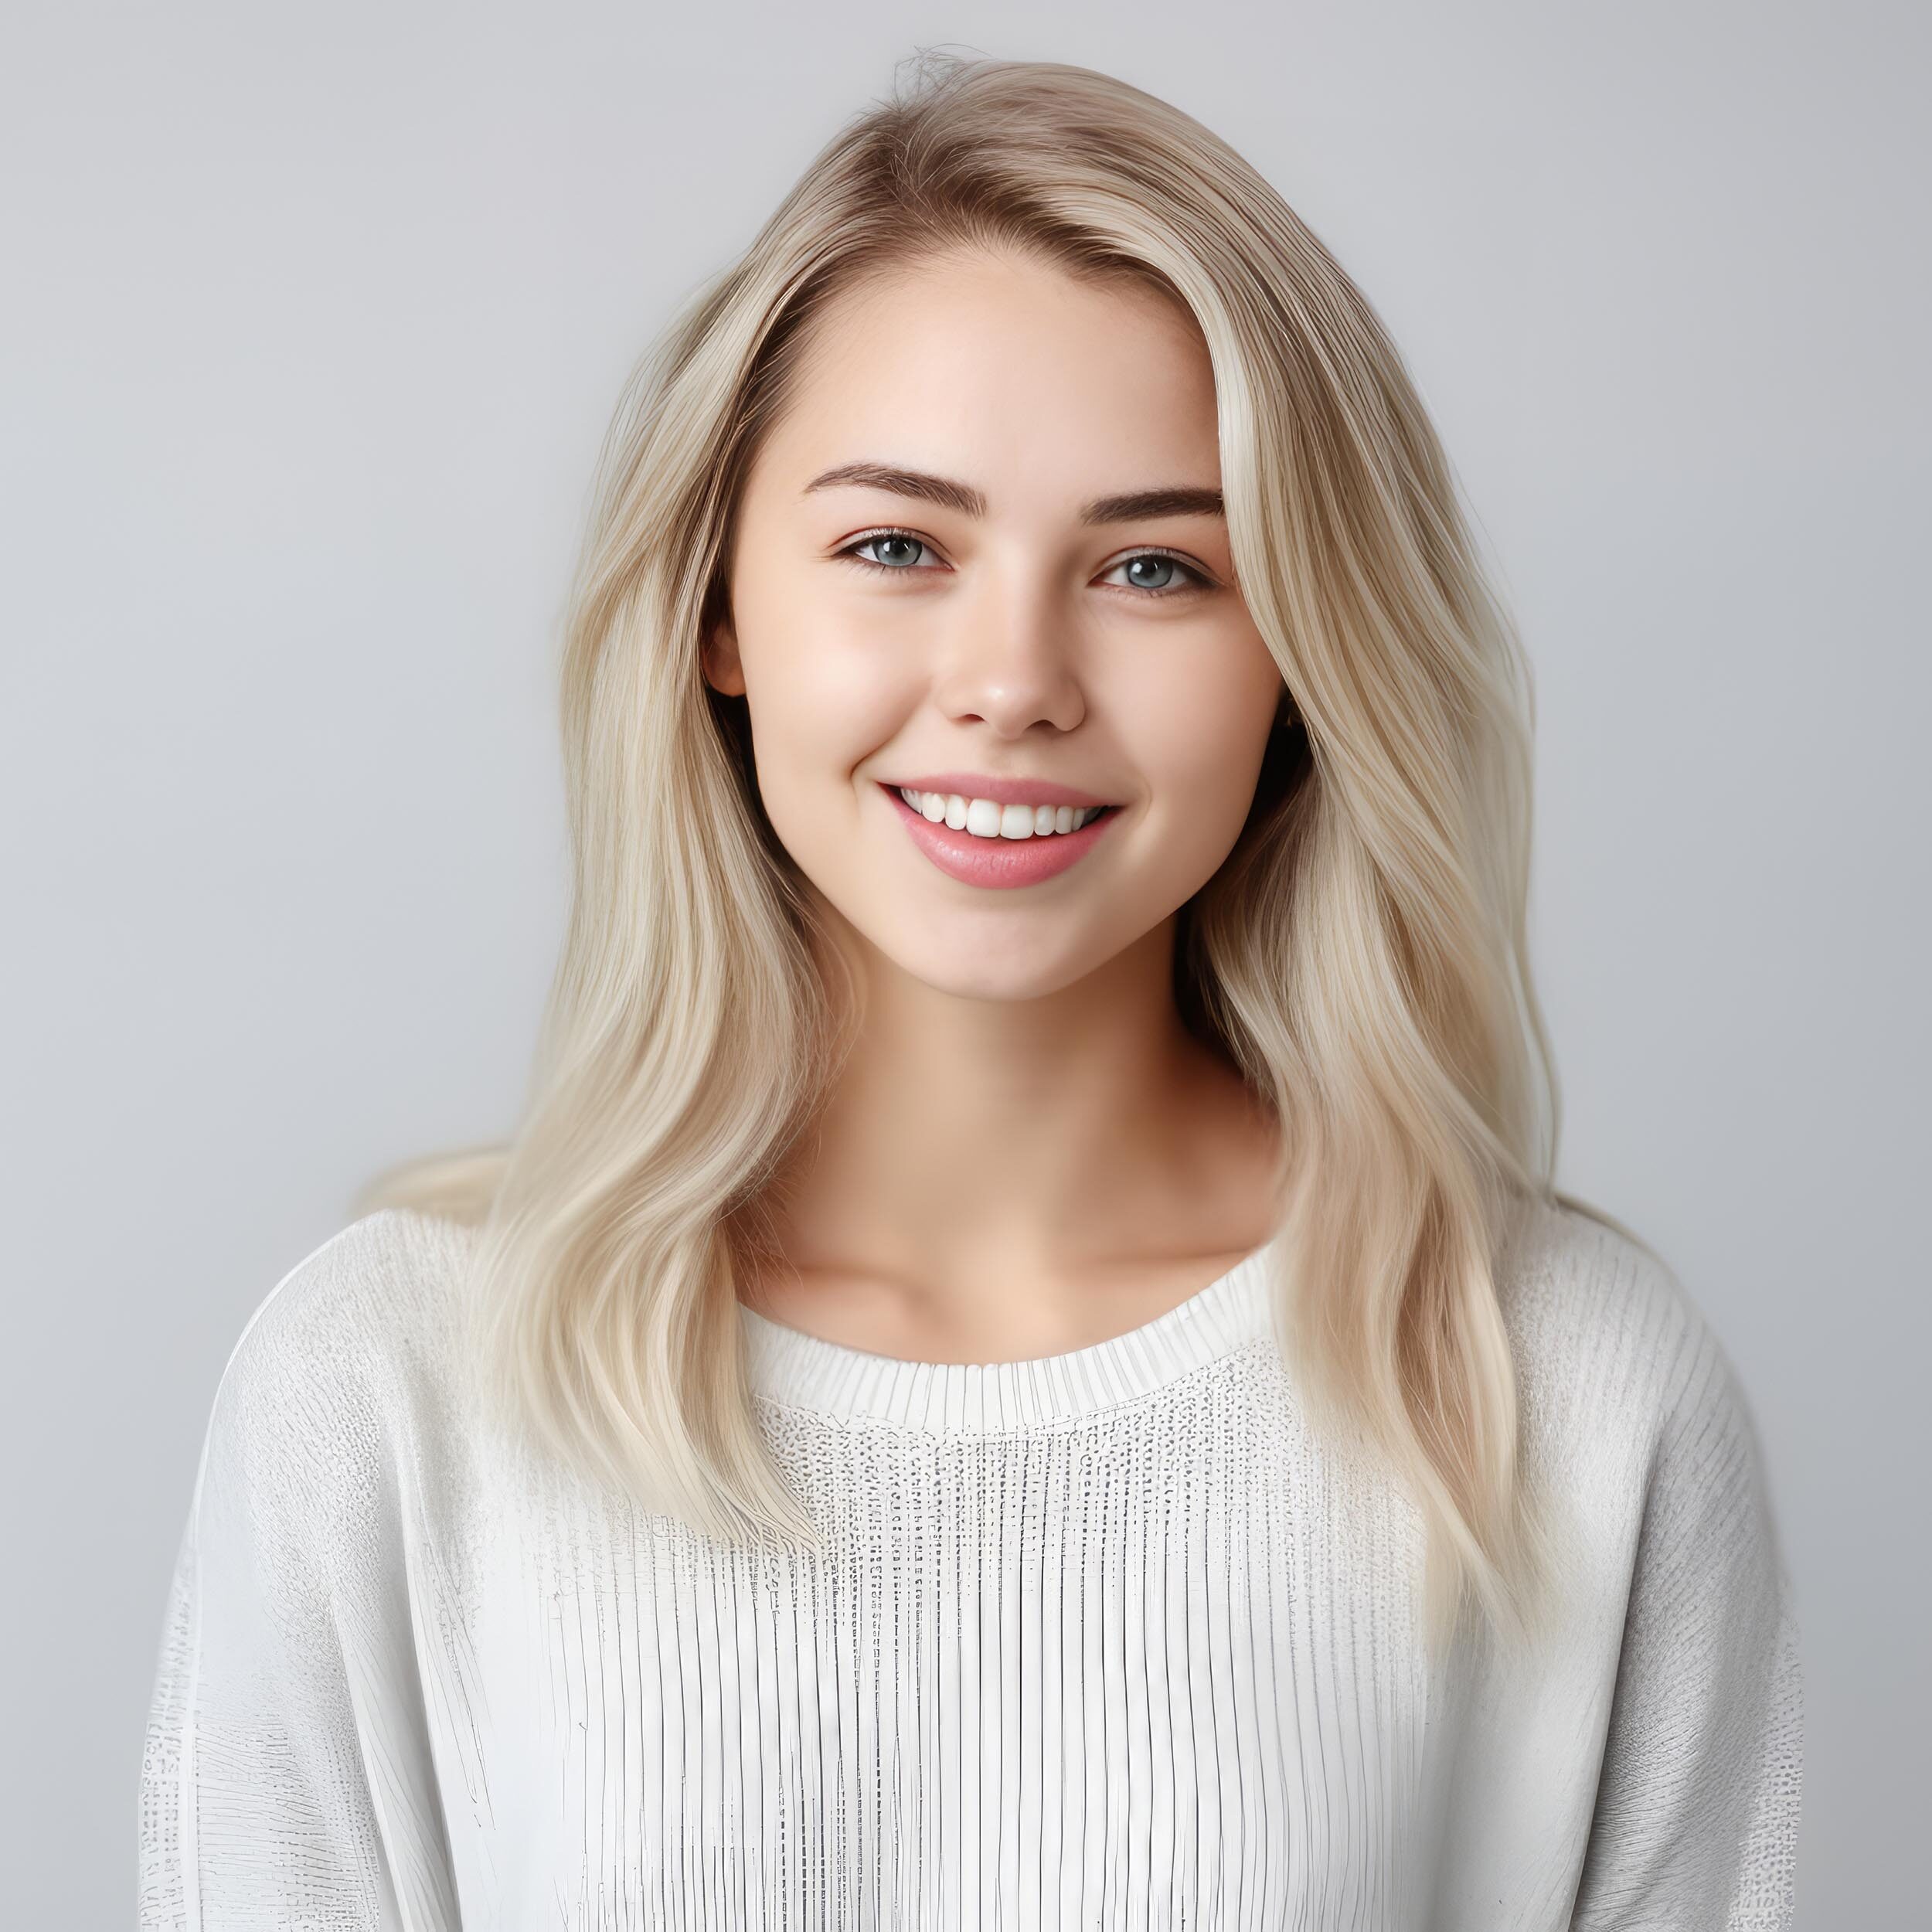 Headshot of a beautiful blond smiling young woman on grey background.